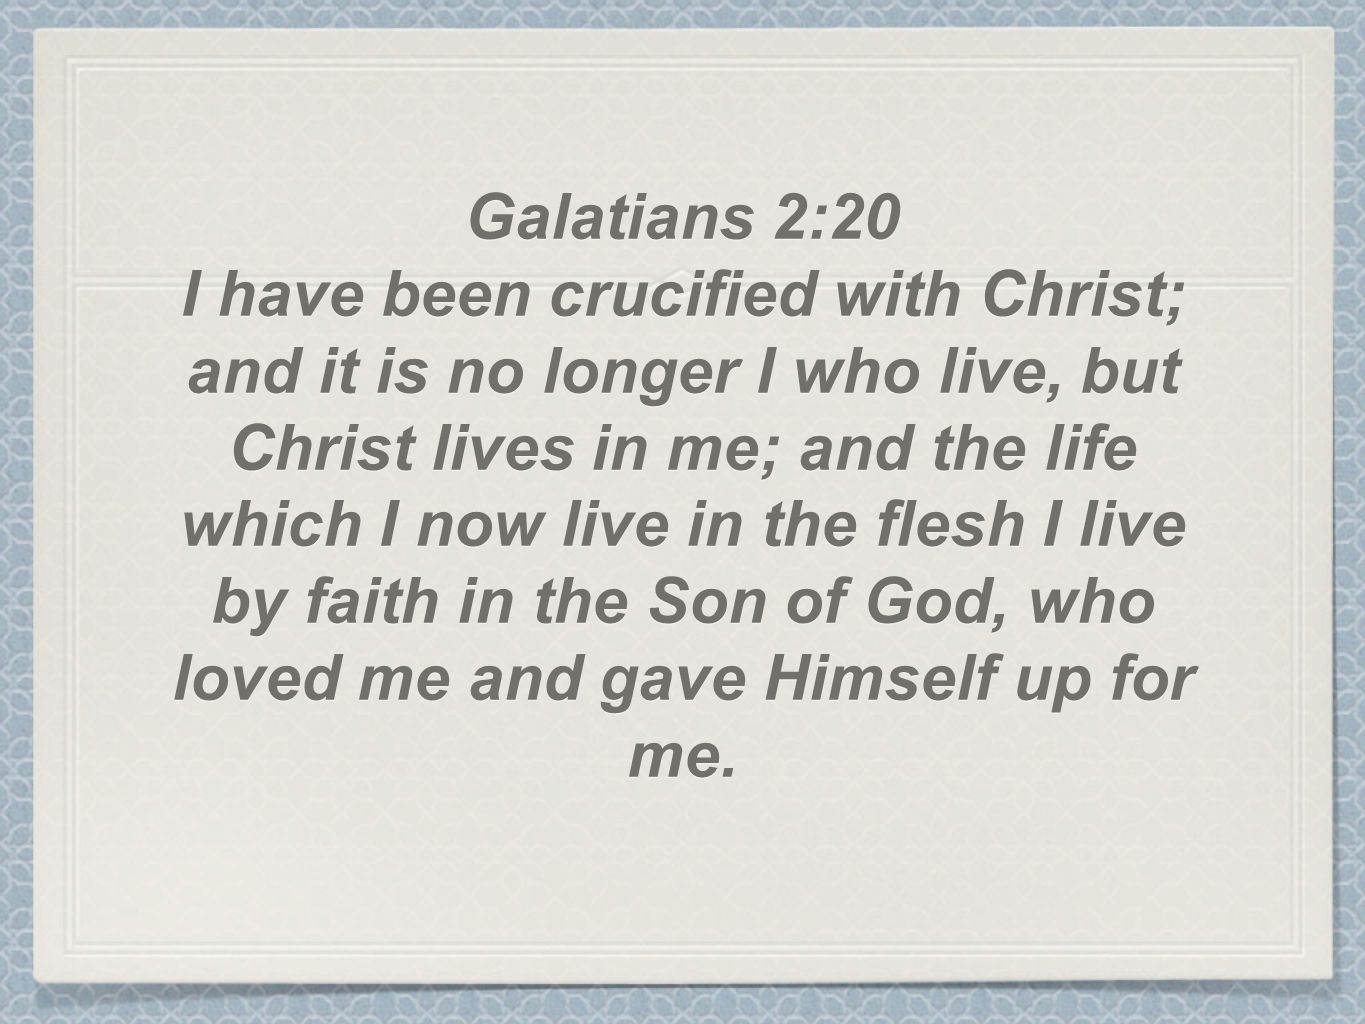 Galatians 2:20 I have been crucified with Christ; and it is no longer I who live, but Christ lives in me; and the life which I now live in the flesh I live by faith in the Son of God, who loved me and gave Himself up for me.